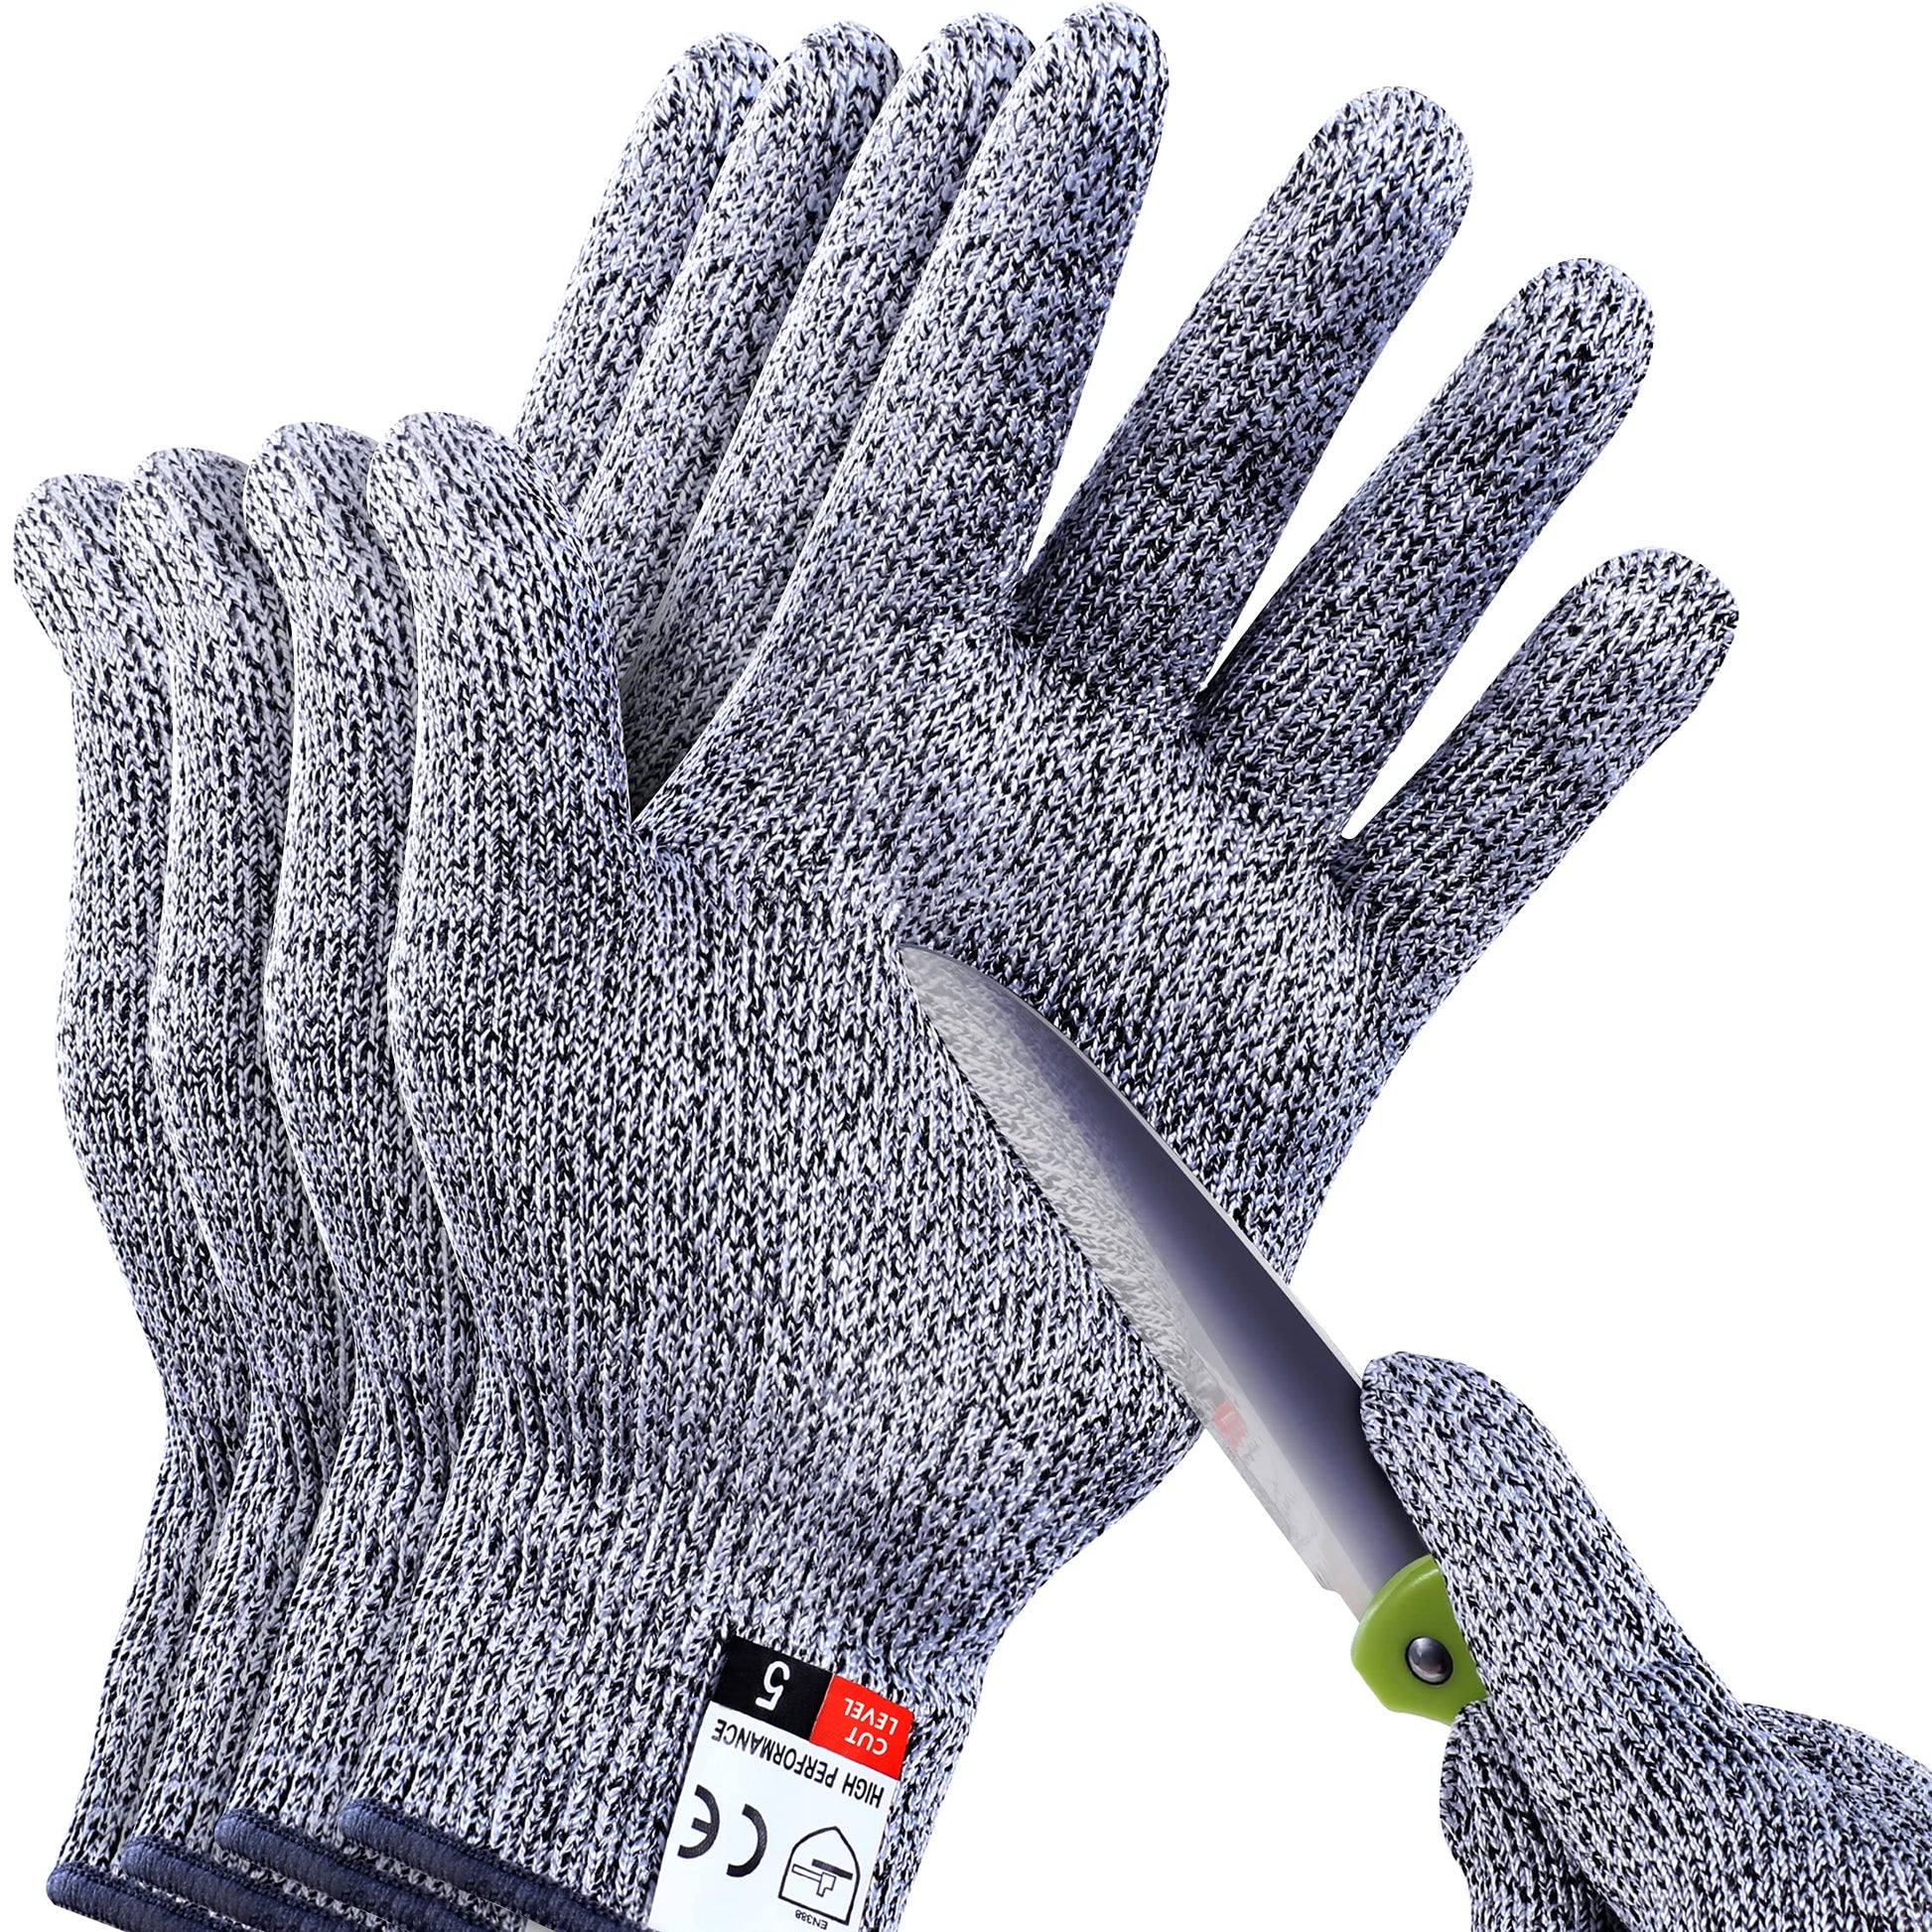 Schwer ANSI A9 Cut Resistant Gloves, Uncoated Food Grade Reliable Cutting Gloves, Mandoline Gloves for Kitchen Meat Cutting, Oyster Shucking, Fish